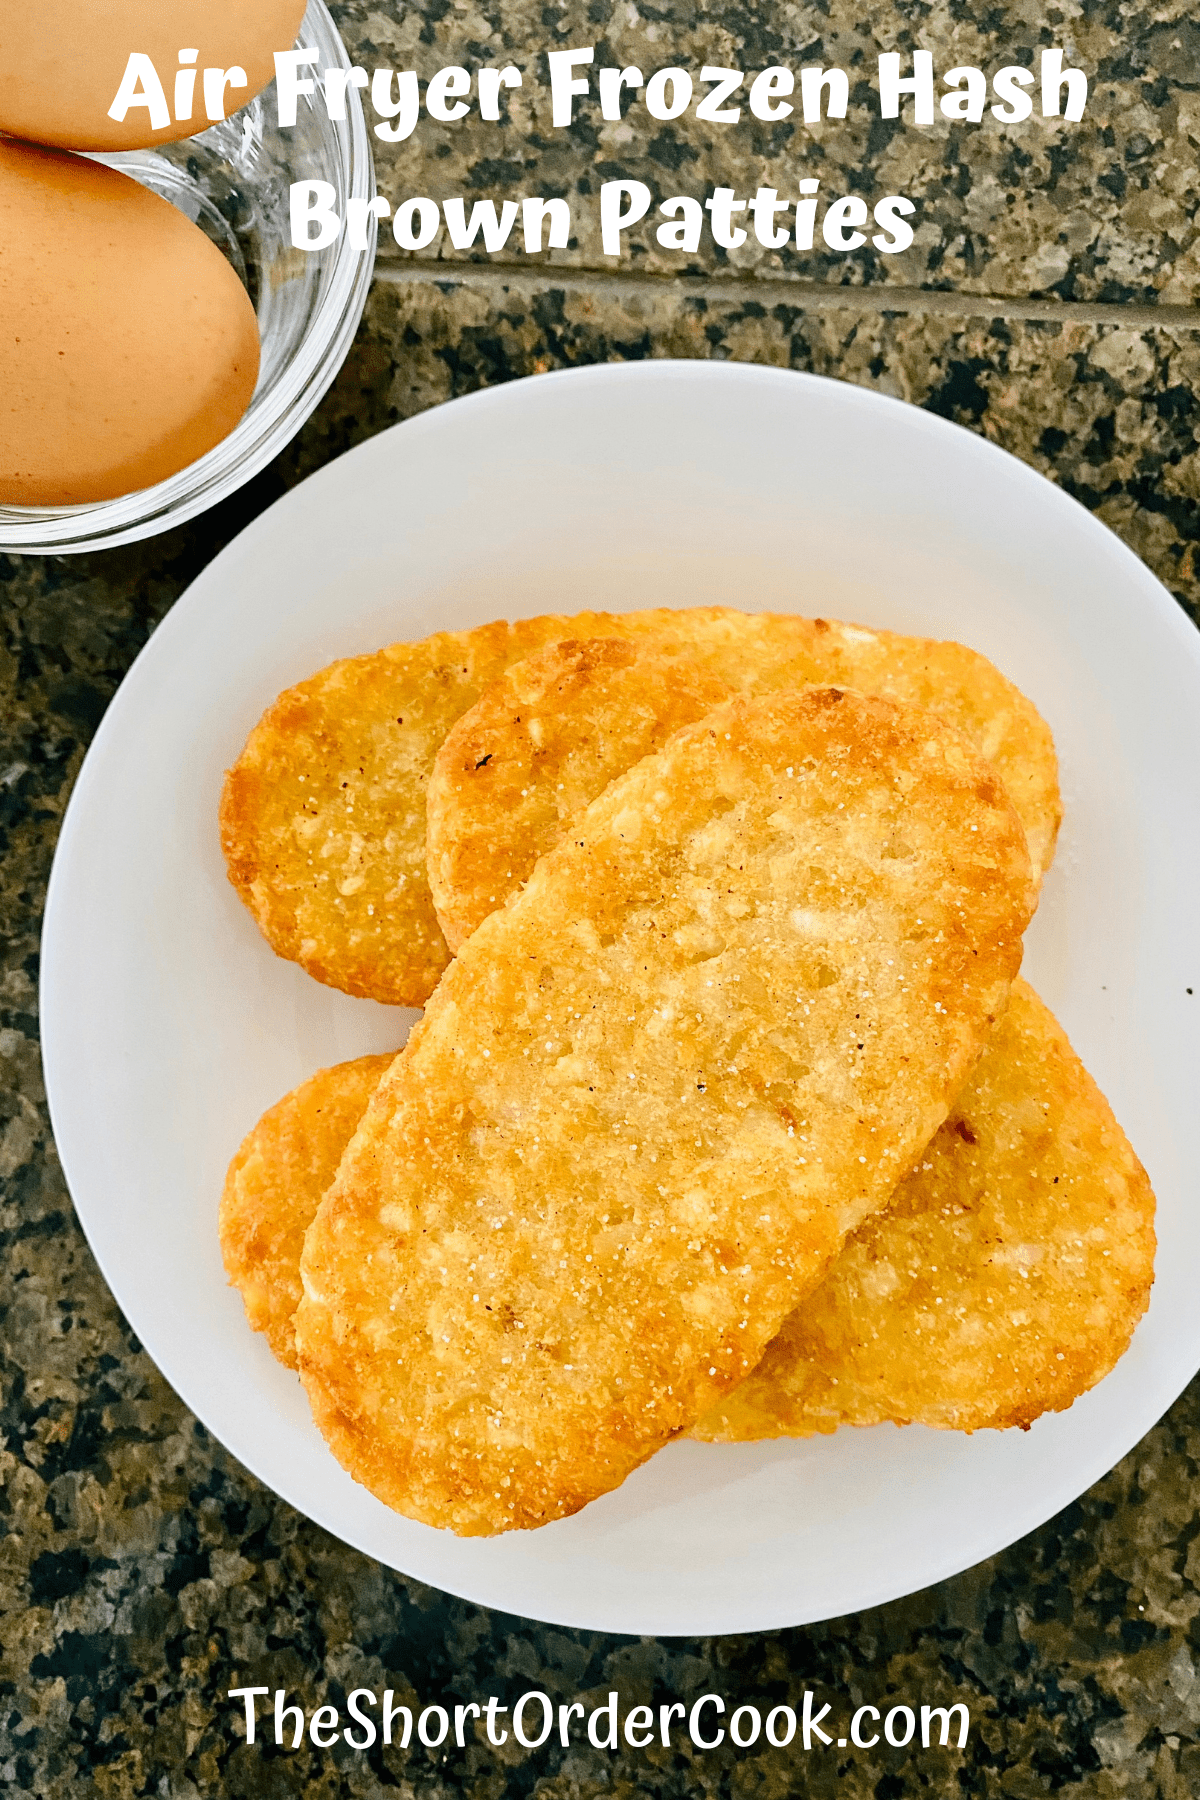 4 plated air fryer frozen hash brown patties ready to eat